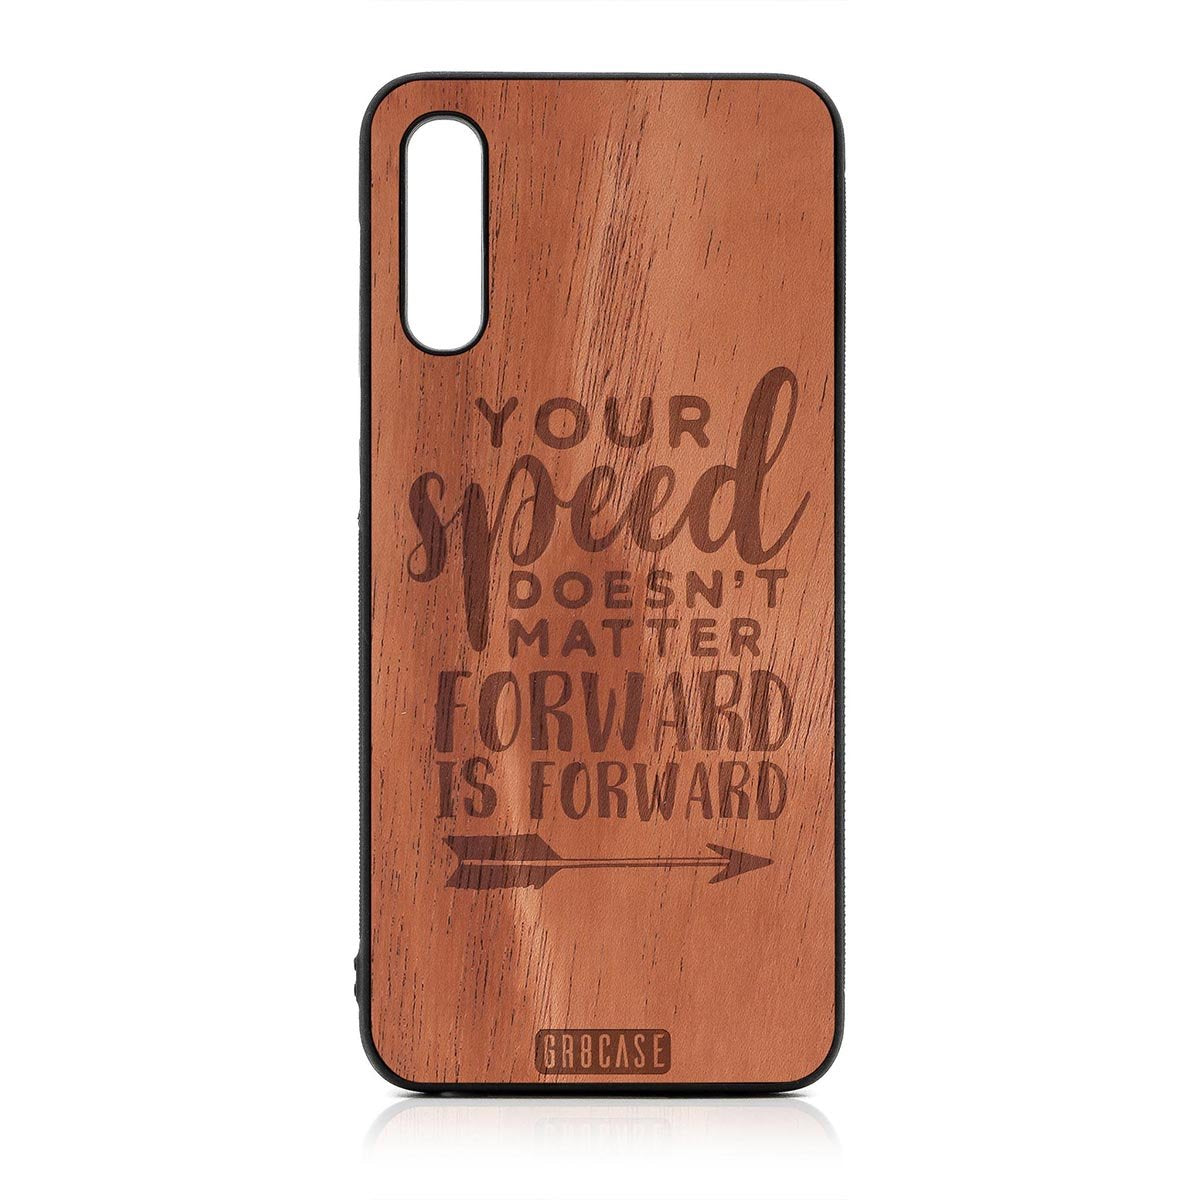 Your Speed Doesn't Matter Forward Is Forward Design Wood Case For Samsung Galaxy A50